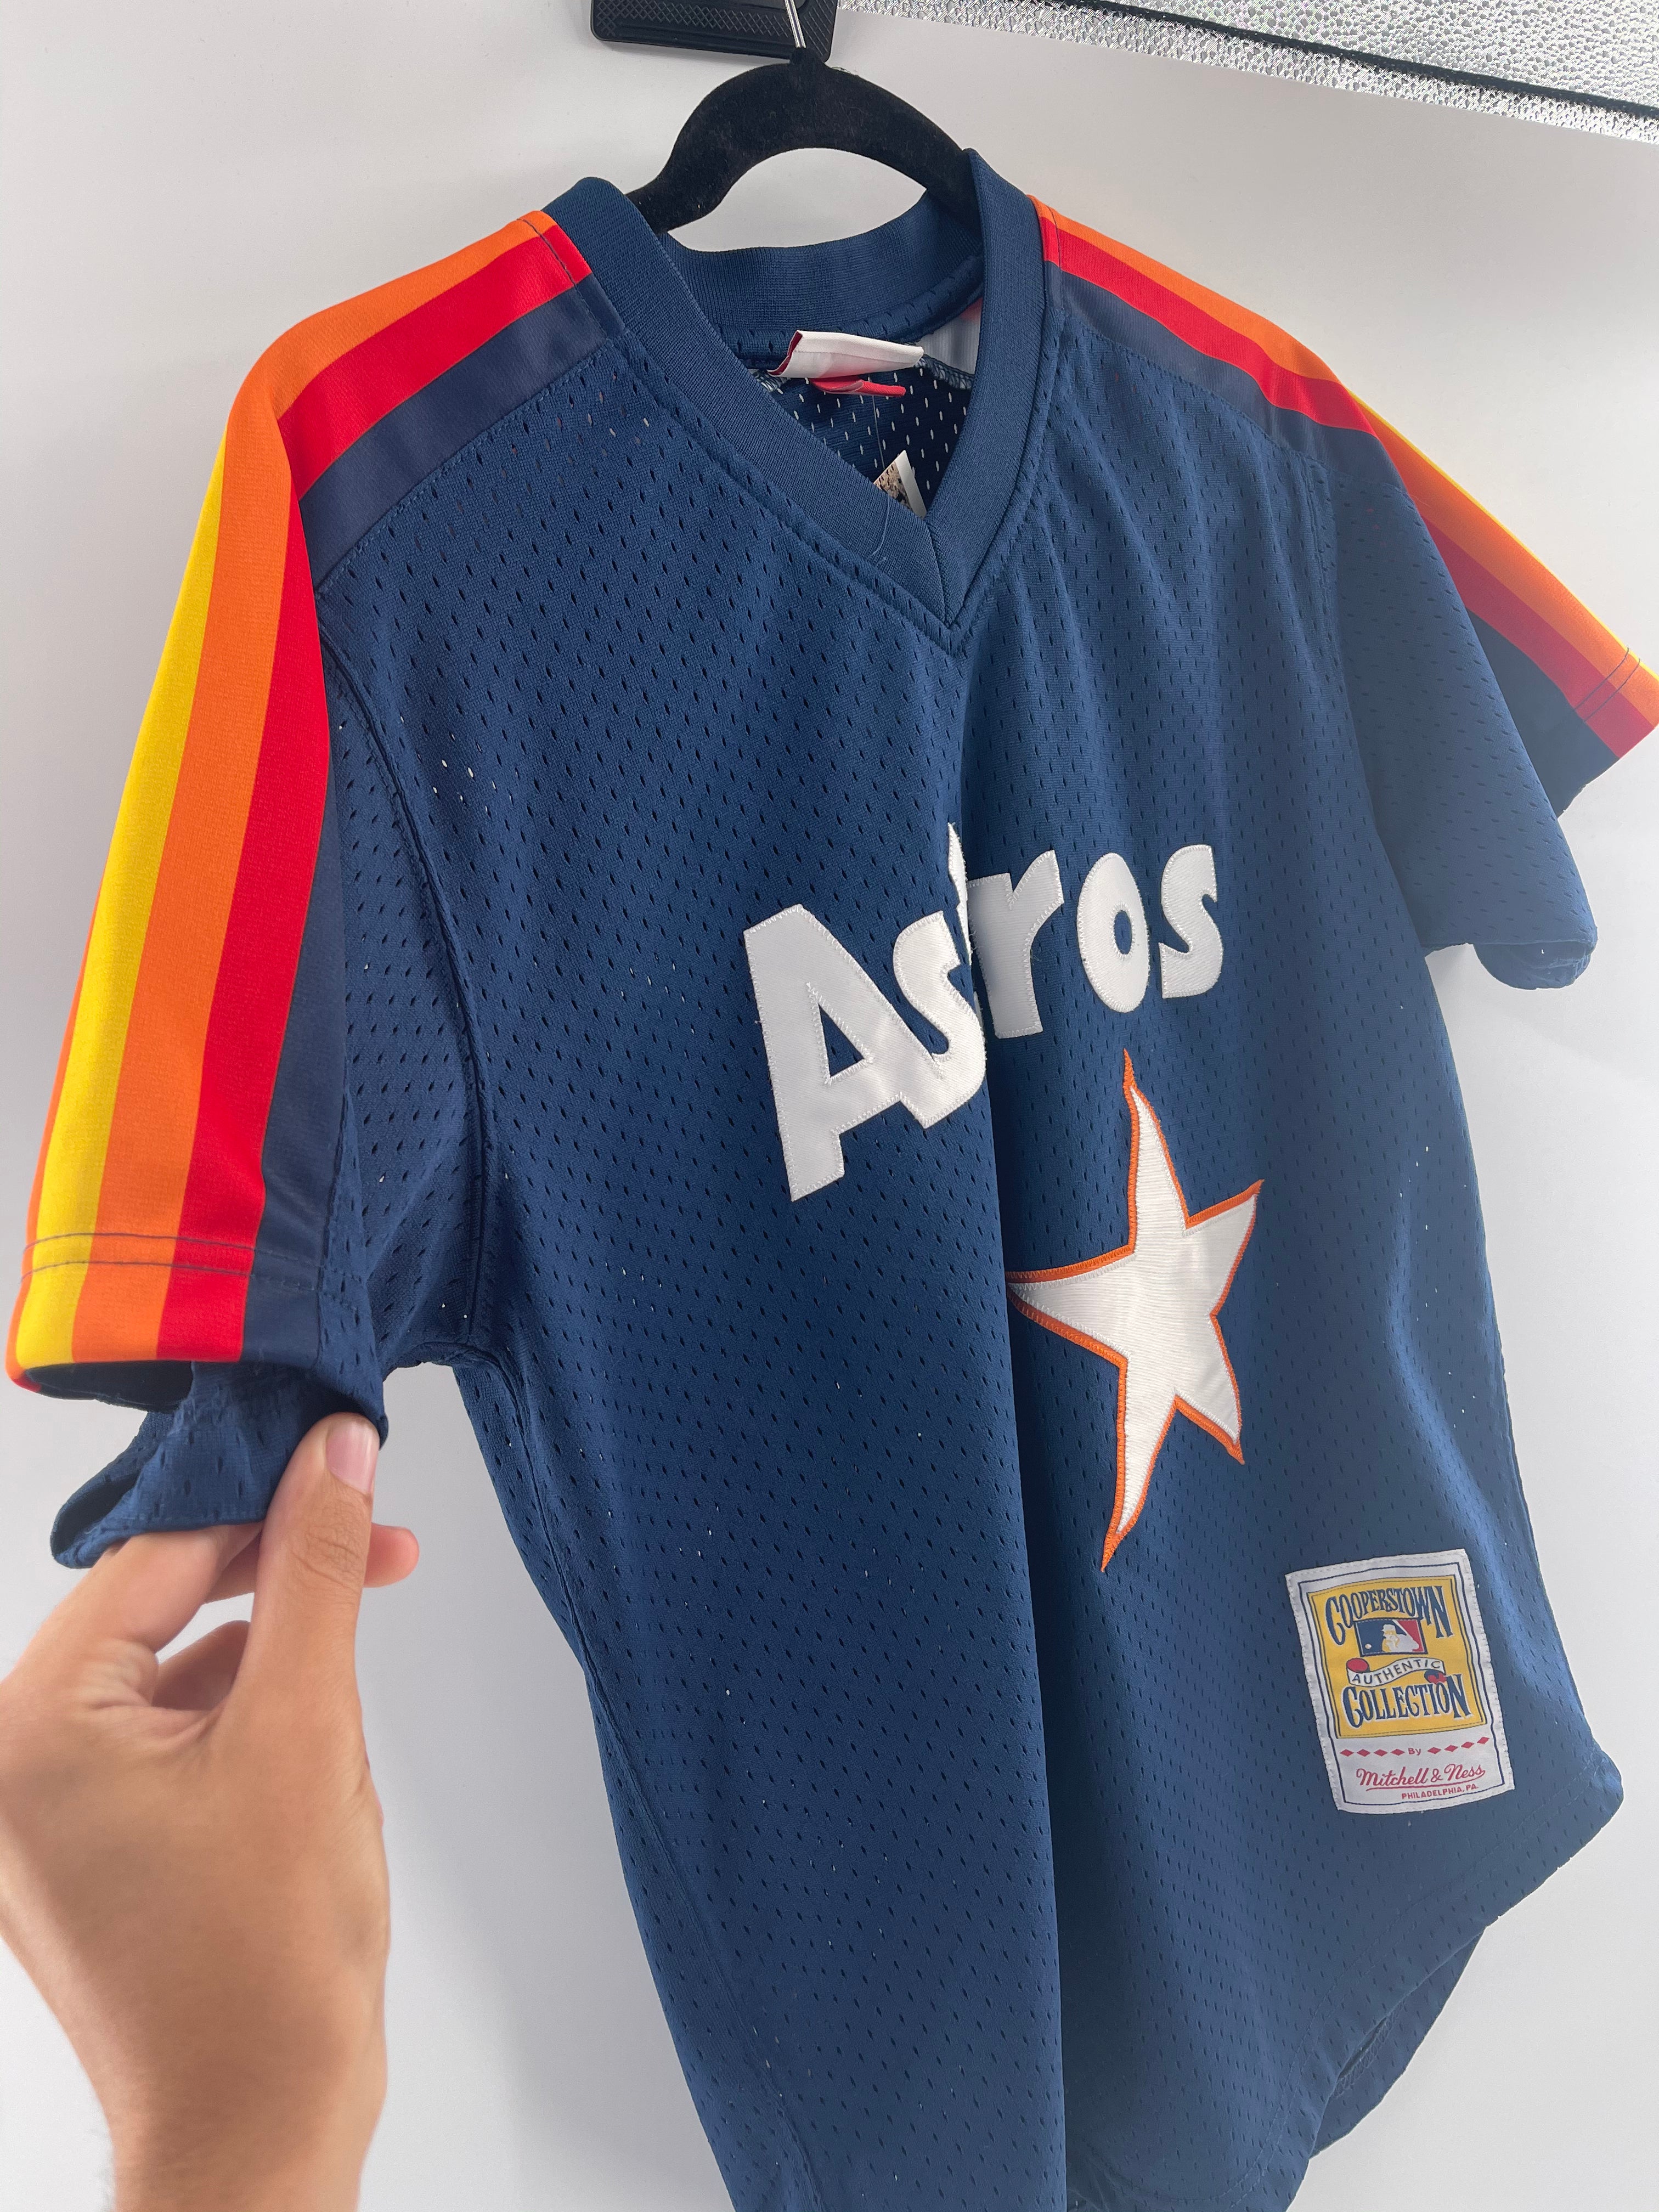 Mitchell & Ness Houston Astros Vintage Sweater for Sale in Aliso